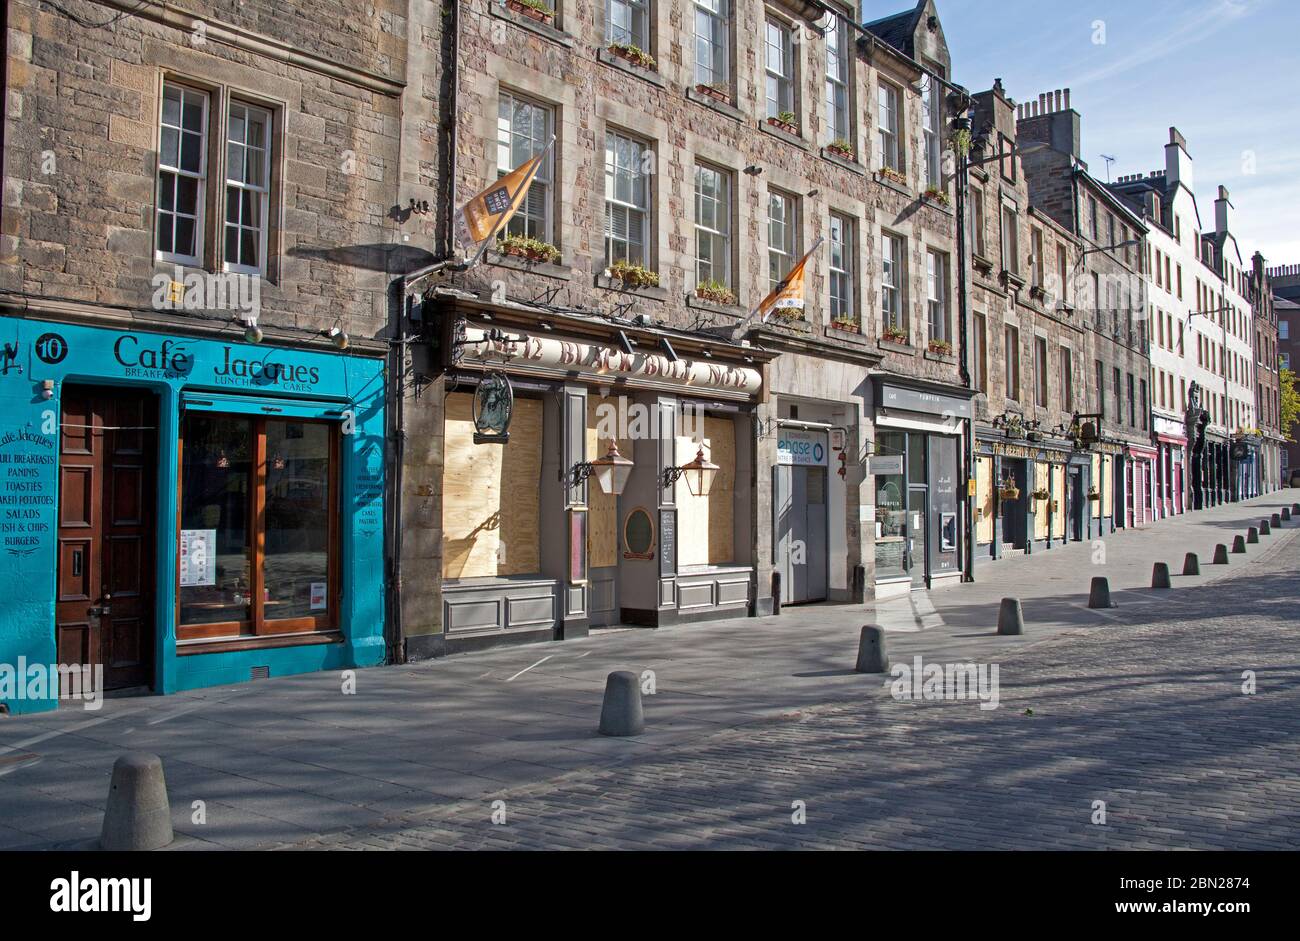 Edinburgh city centre, Scotland, UK. 12th May 2020. Fiftieth day of UK Covid-19 Coronavirus Lockdown, streets and pavements pictured show a touristless city with very little traffic or pedestrians out and about before 9.45am, pictured view up the normally busy Grassmarket. Many boarded up pubs which are not expected to open in Scotland until perhaps July. Credit: Arch White/Alamy Live News. Stock Photo